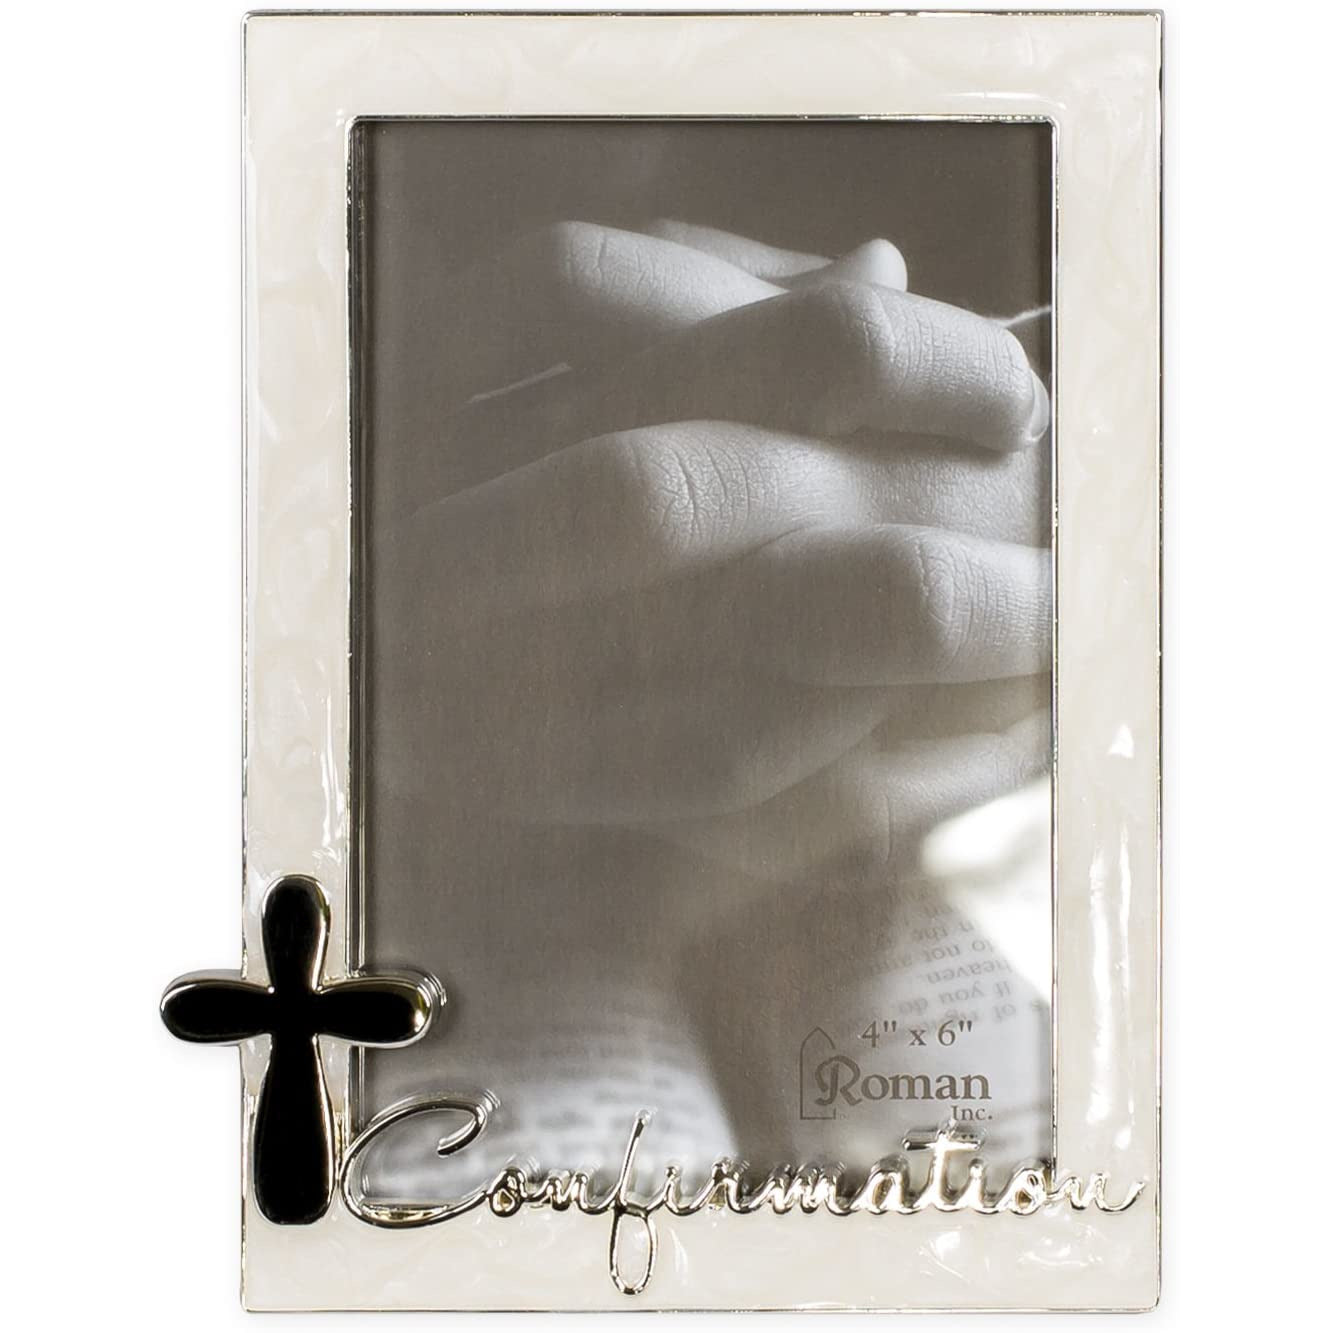 Roman Confirmation Silver Finish Cross 4 x 6 Photo Pearl Trim Picture Frame